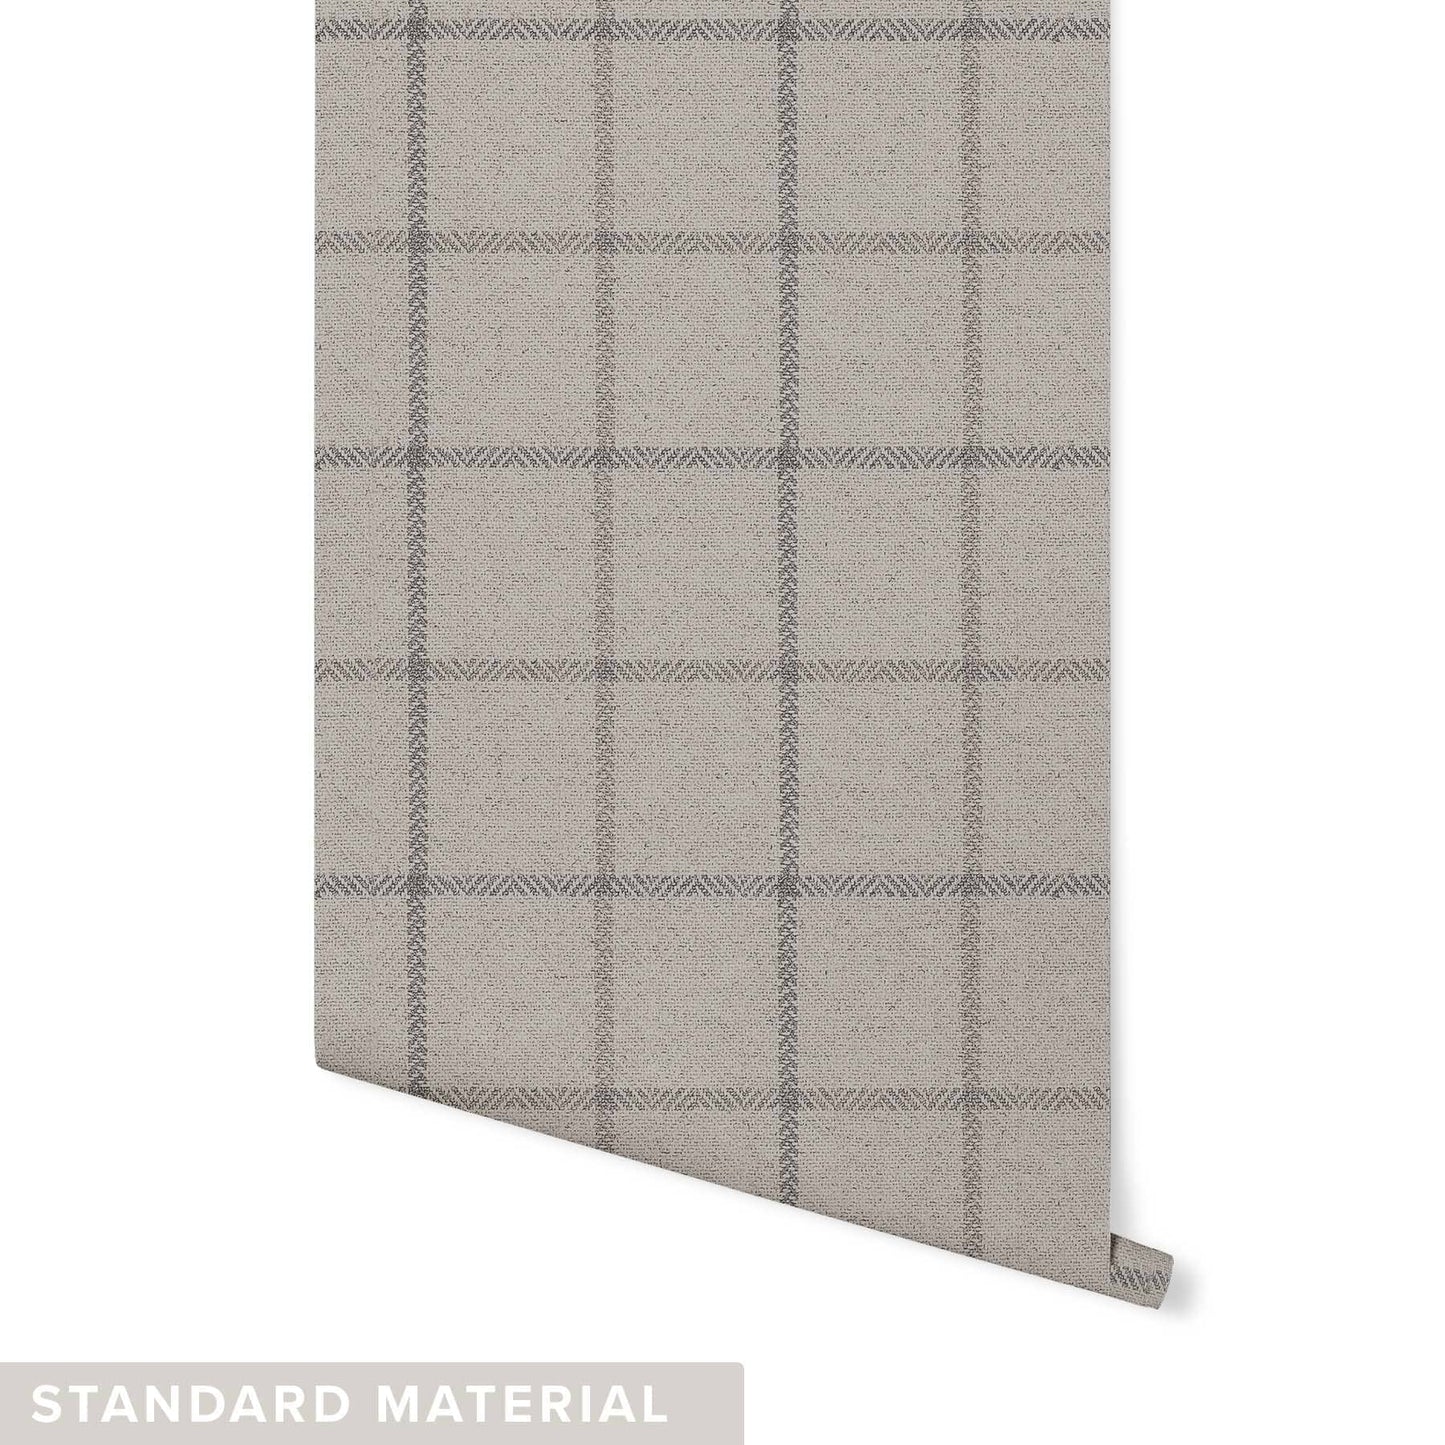 Country Plaid Wallpaper Wallpaper Mia Parres Standard Wall Maple Leaf Brown DOUBLE ROLL : 46" X 4 FEET